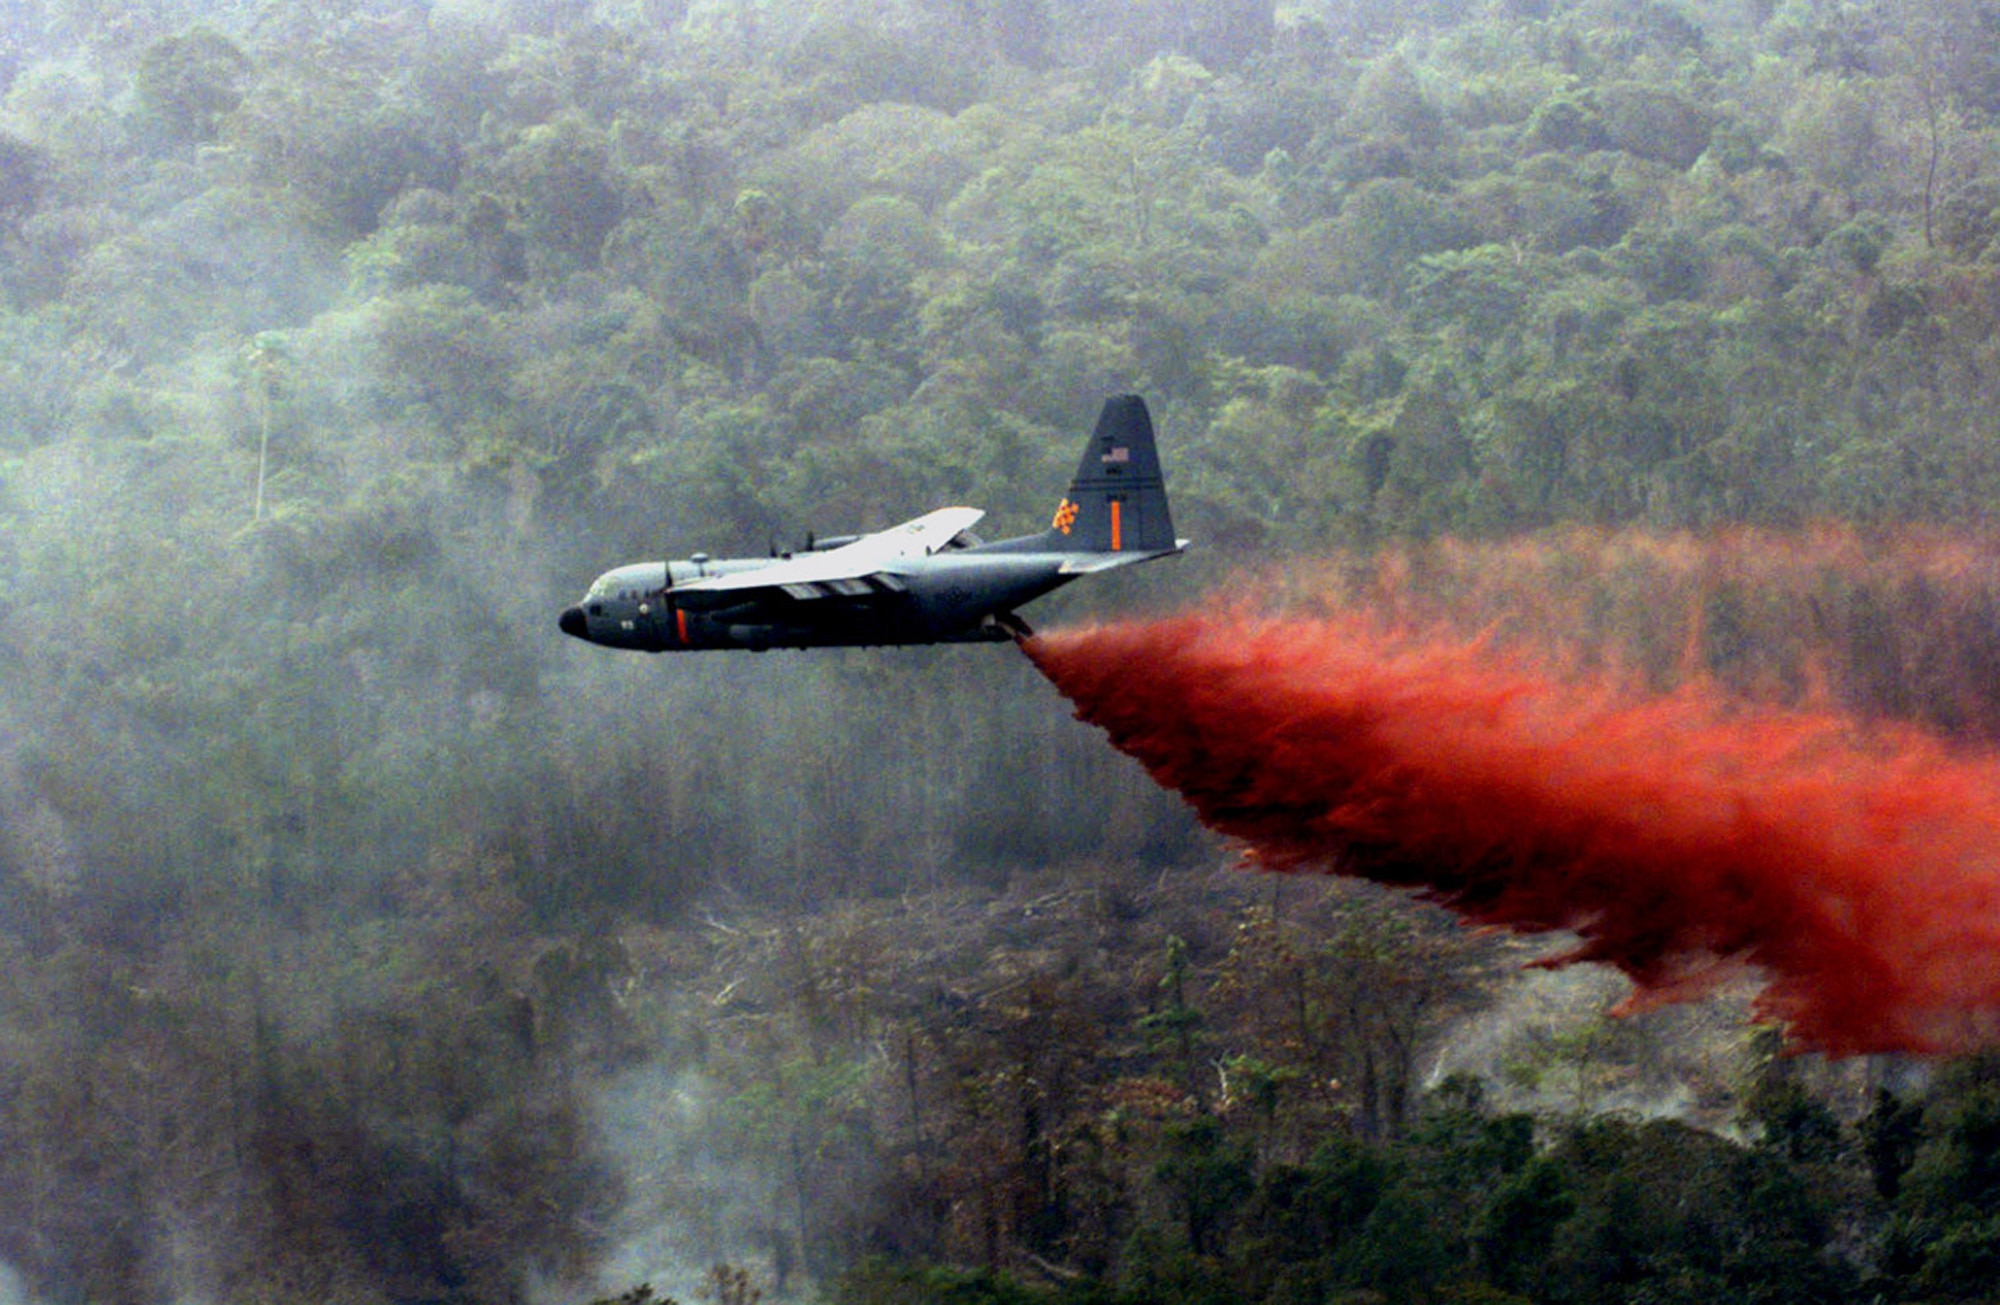 C-130 Hercules aircraft, operated by the 302nd Air Expeditionary Group and equipped with modular airborne fire fighting systems, similar to the one pictured here, have dropped 90,000 gallons of retardant over Texas as of April 25, 2011, to help control the 993,000 acres of burning wildfires. (U.S. Air Force photo/Staff Sgt. Daryl McKamey)